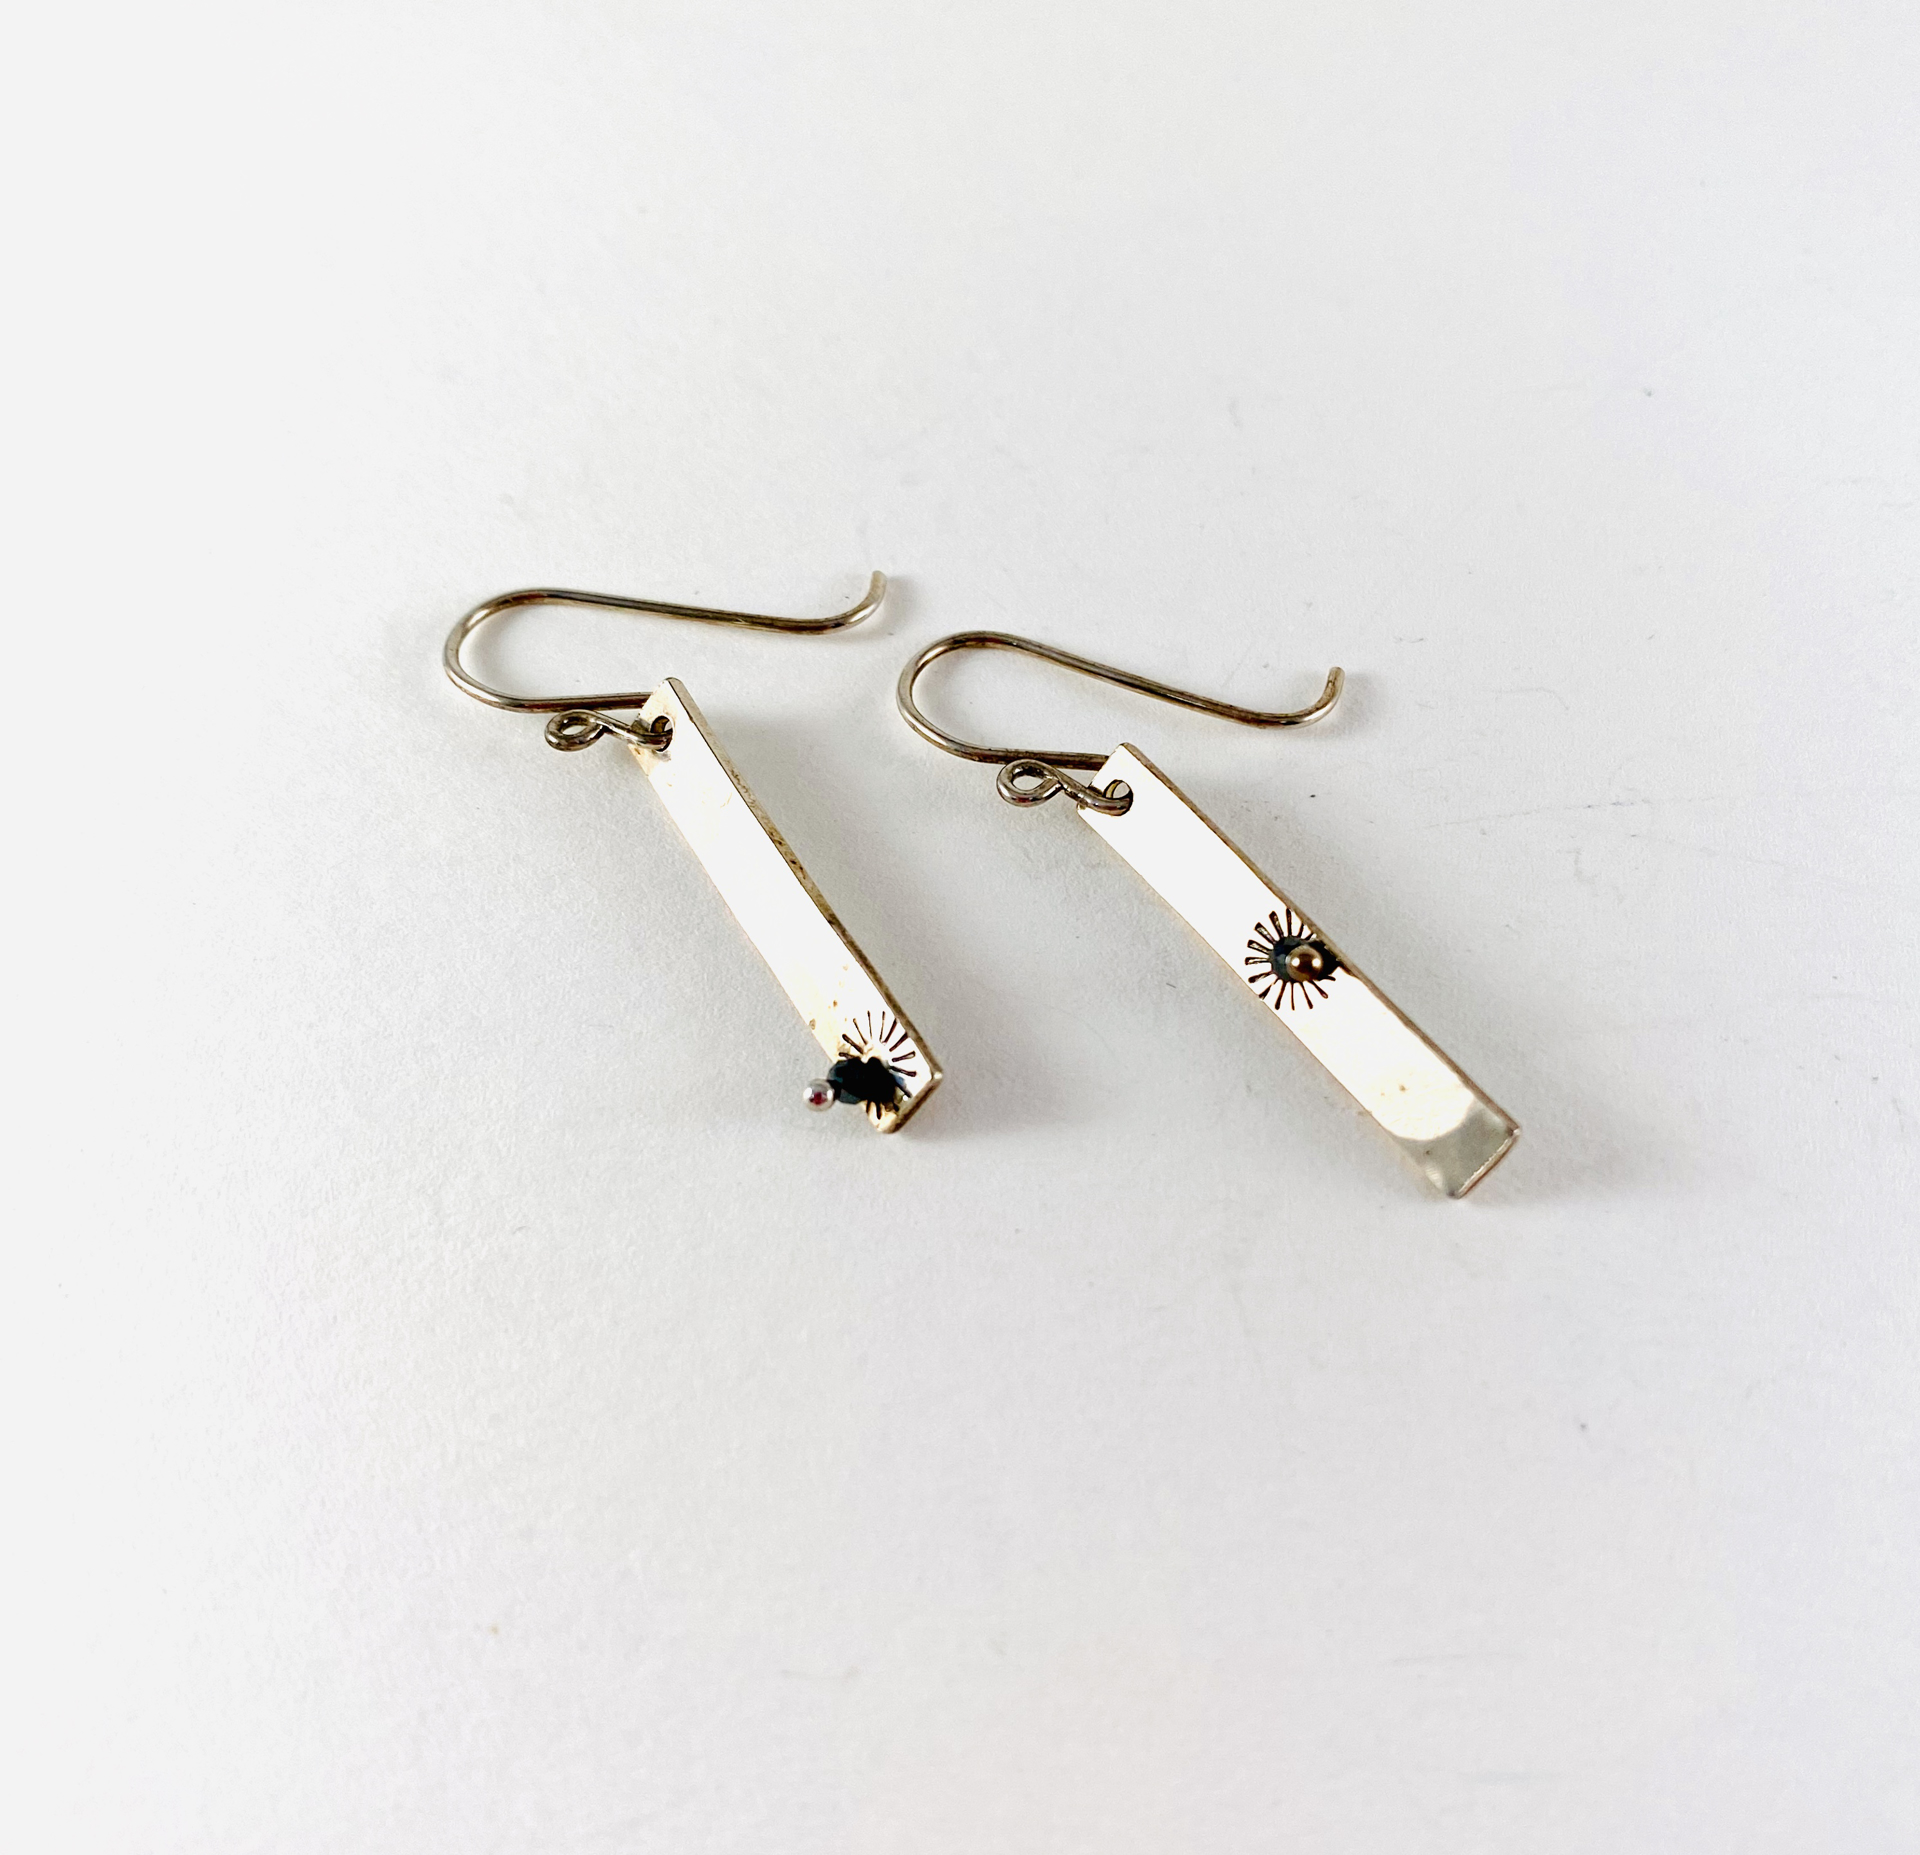 Silver Earrings with Hematite accent, #22 by Shelby Lee - jewelry